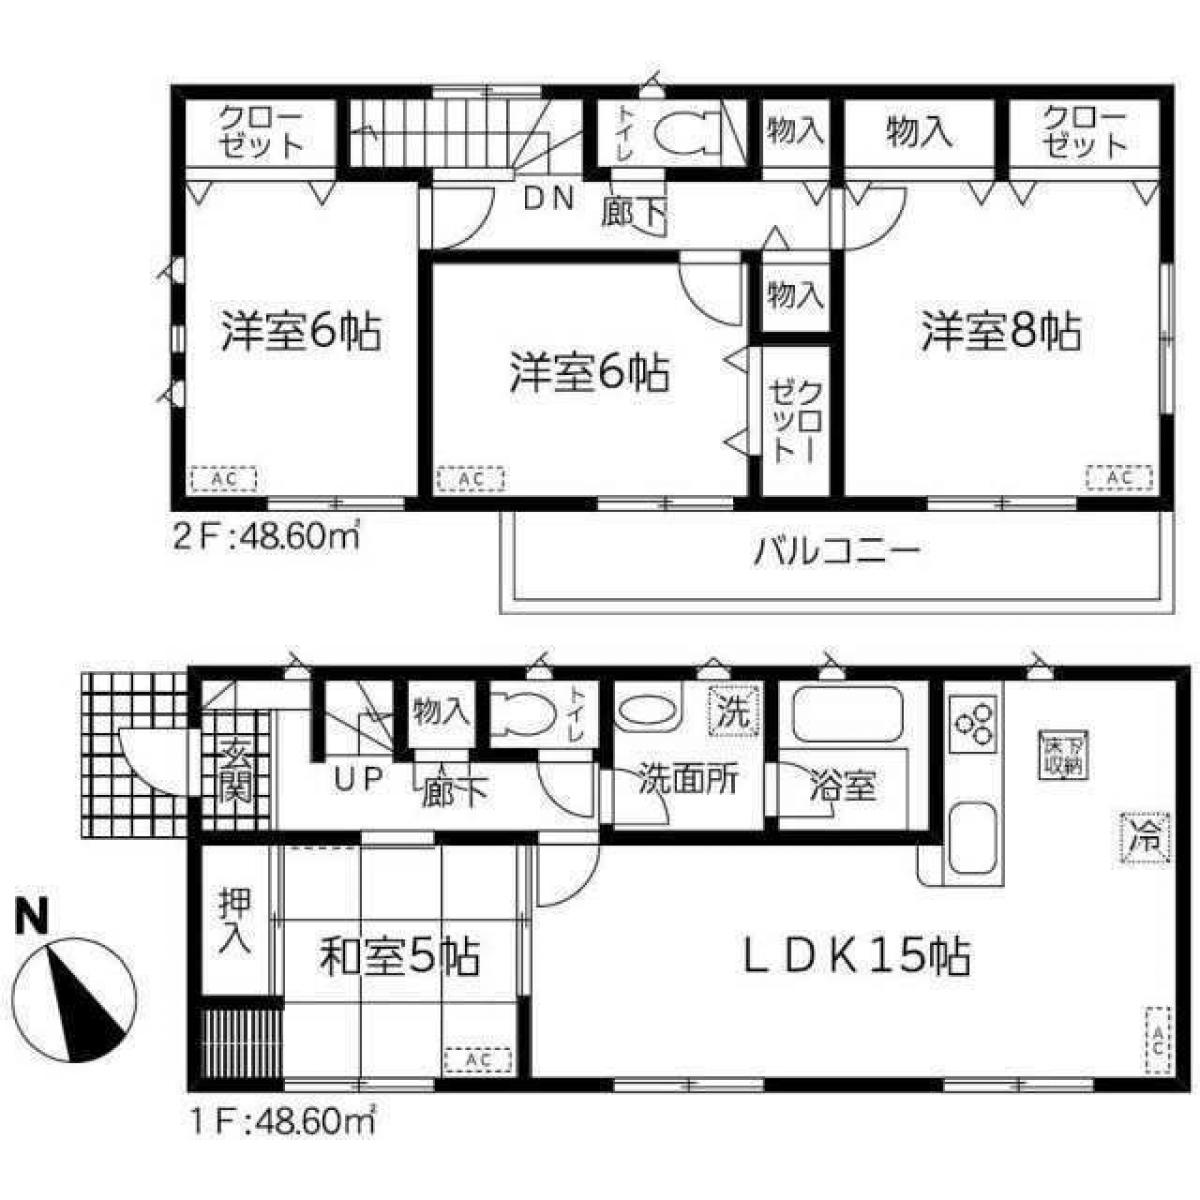 Picture of Home For Sale in Futtsu Shi, Chiba, Japan